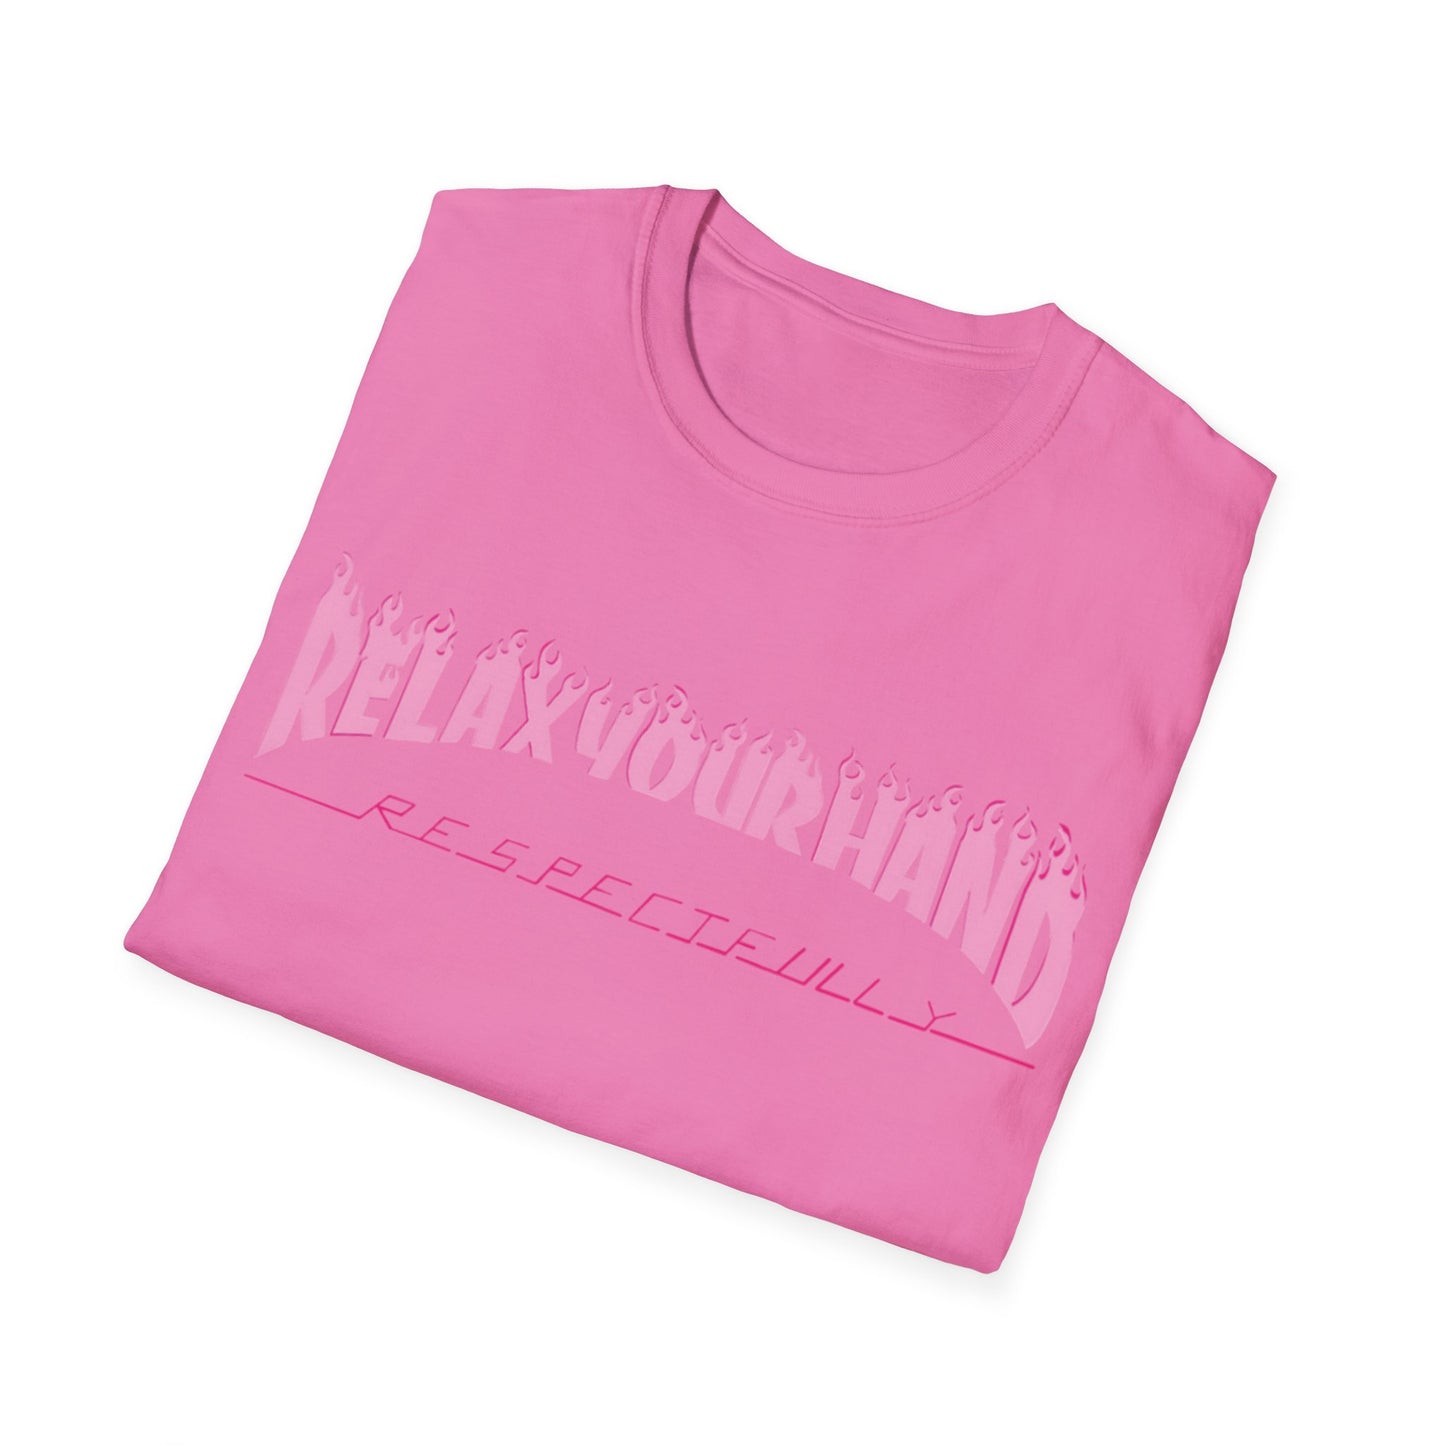 RELAX YOUR HAND merch